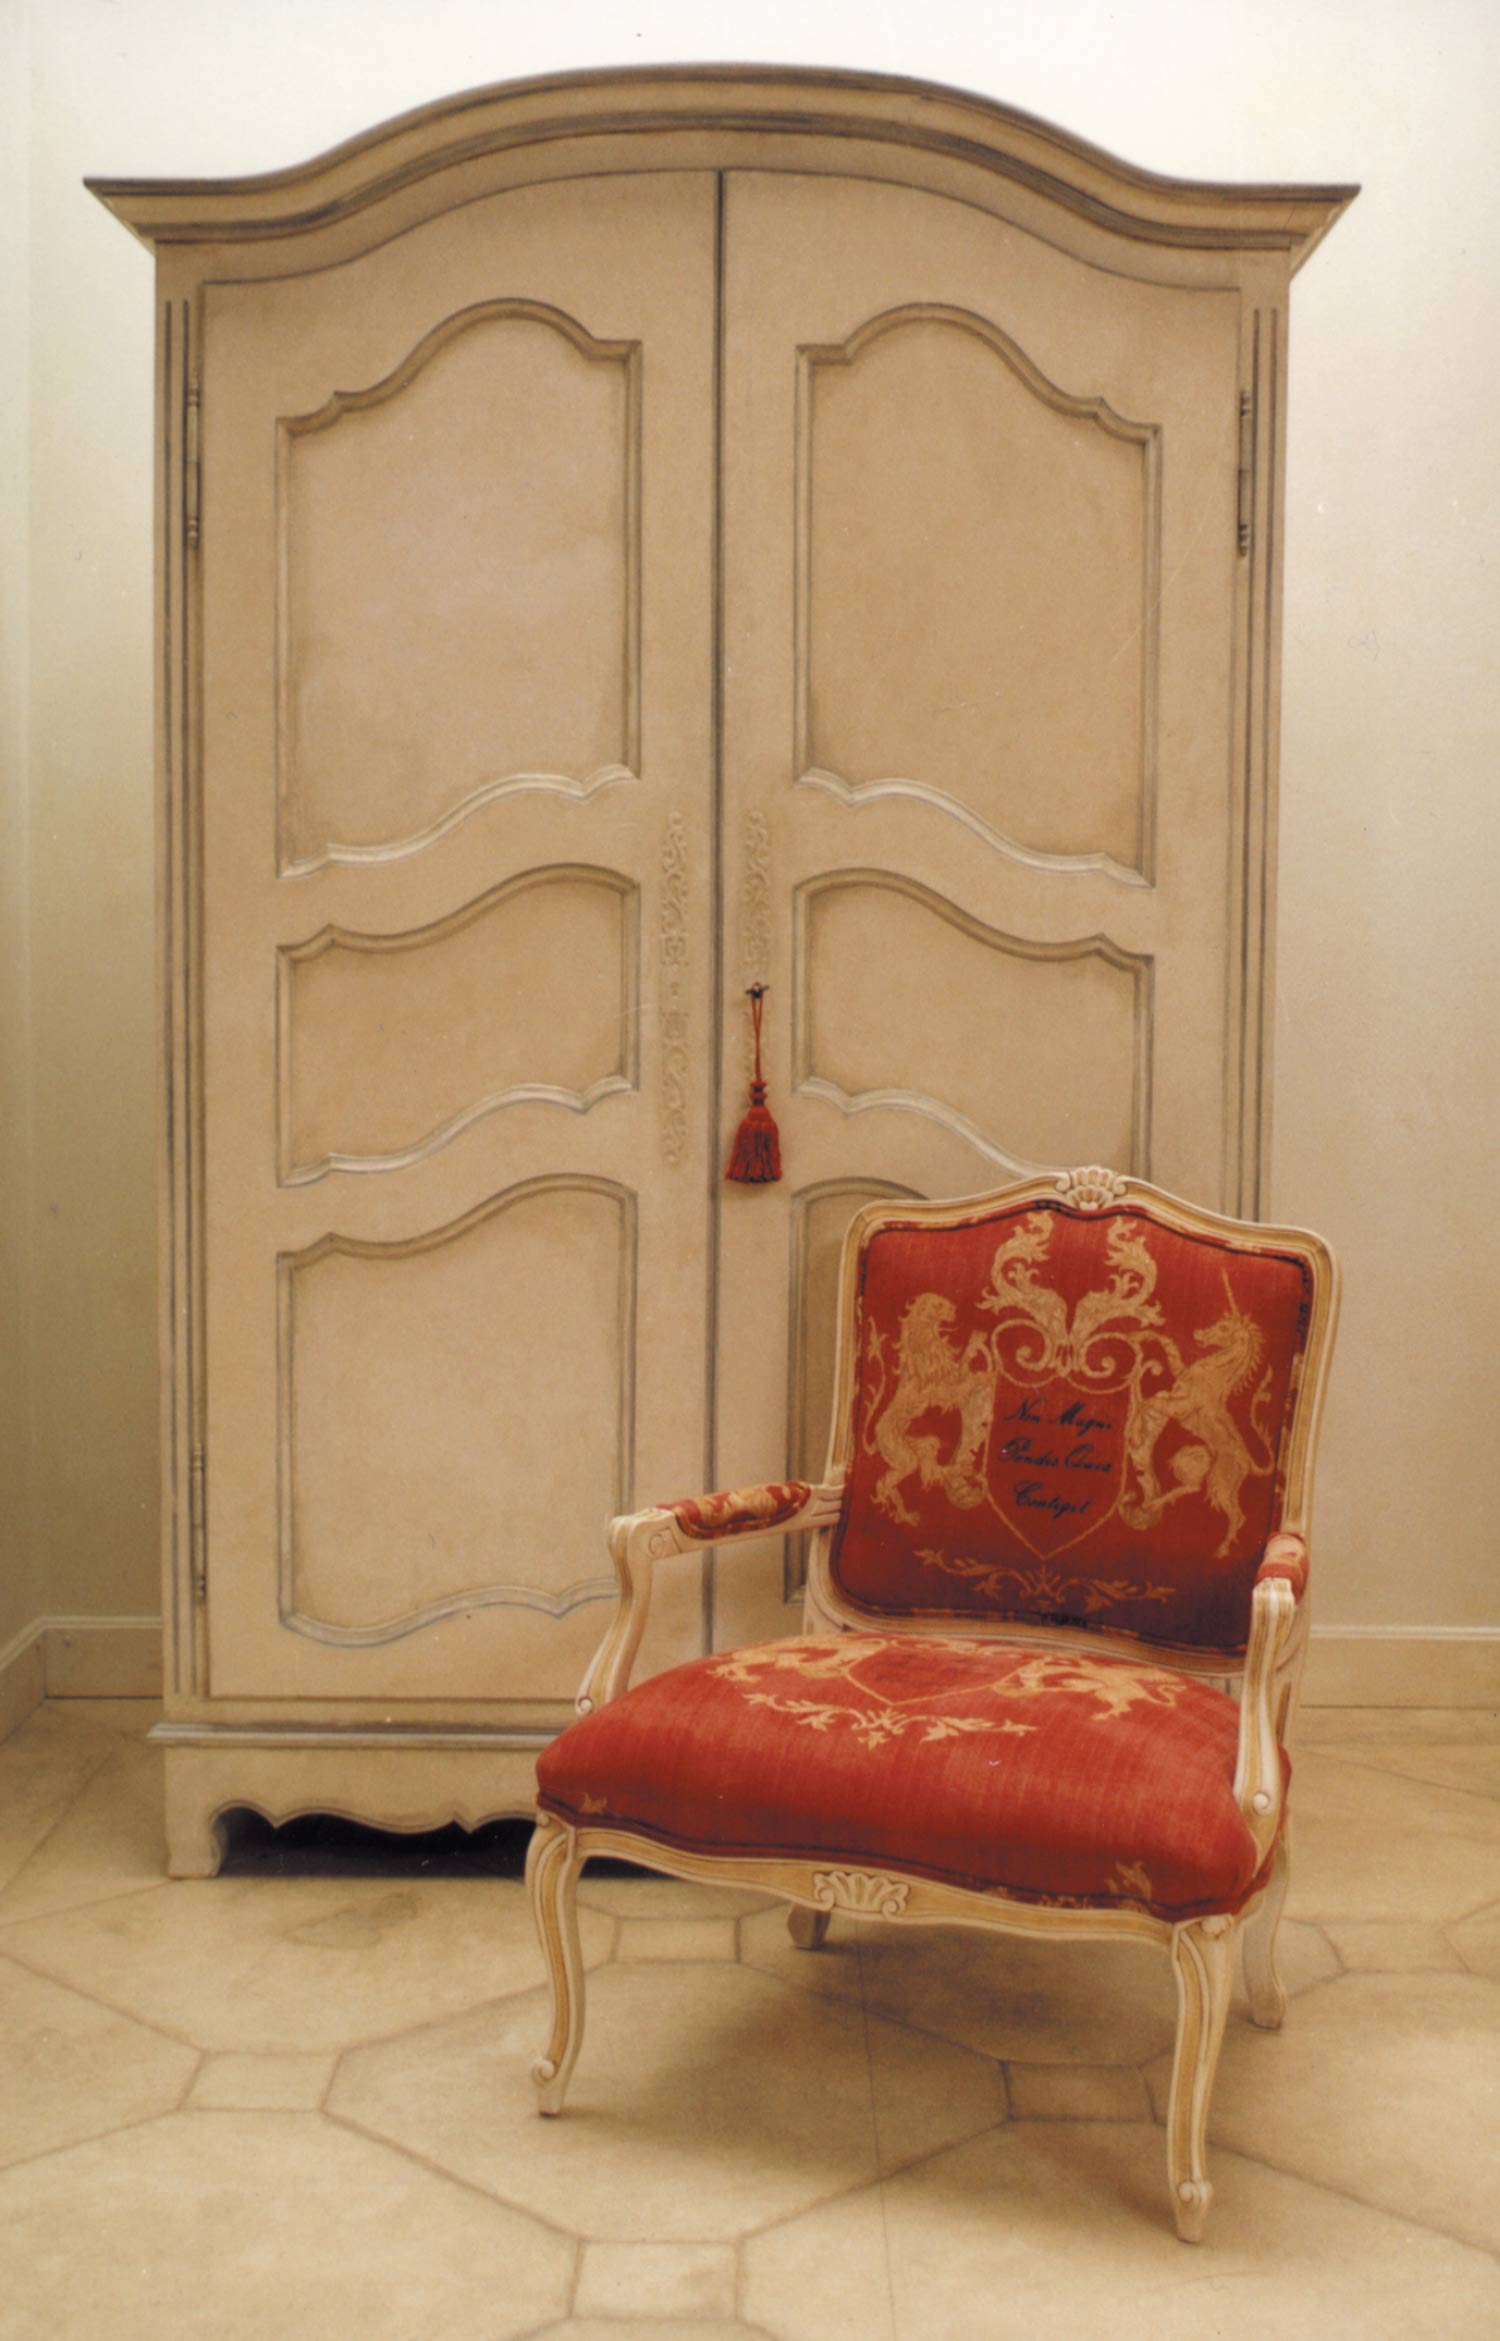 22 French Provincial cherry-wood furniture by Jean-Christophe Burckhardt